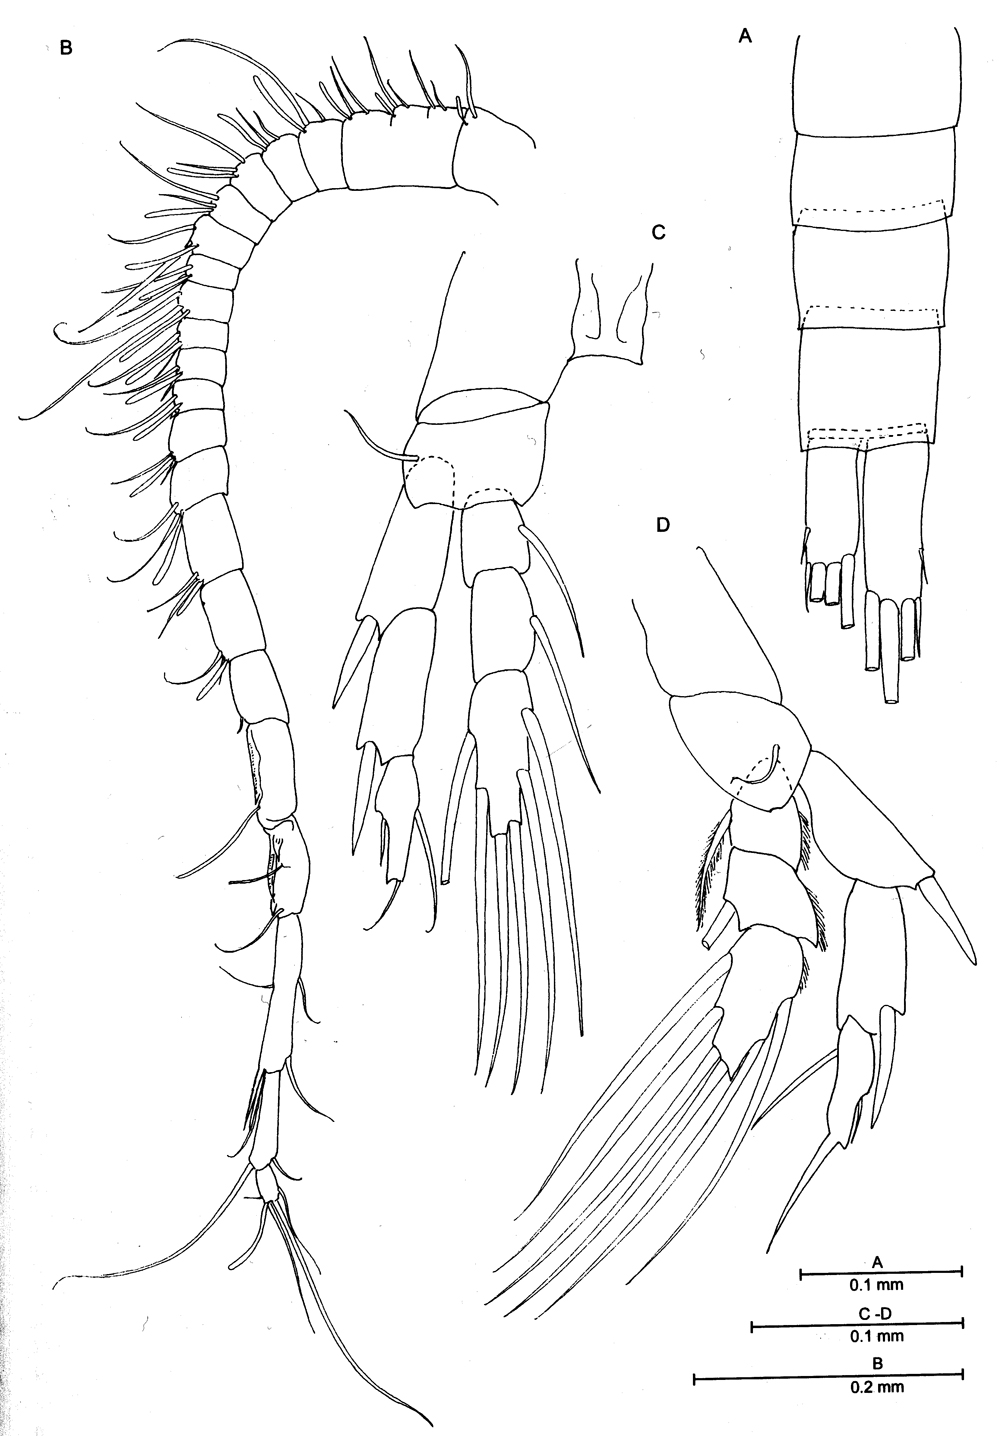 Species Gloinella yagerae - Plate 4 of morphological figures